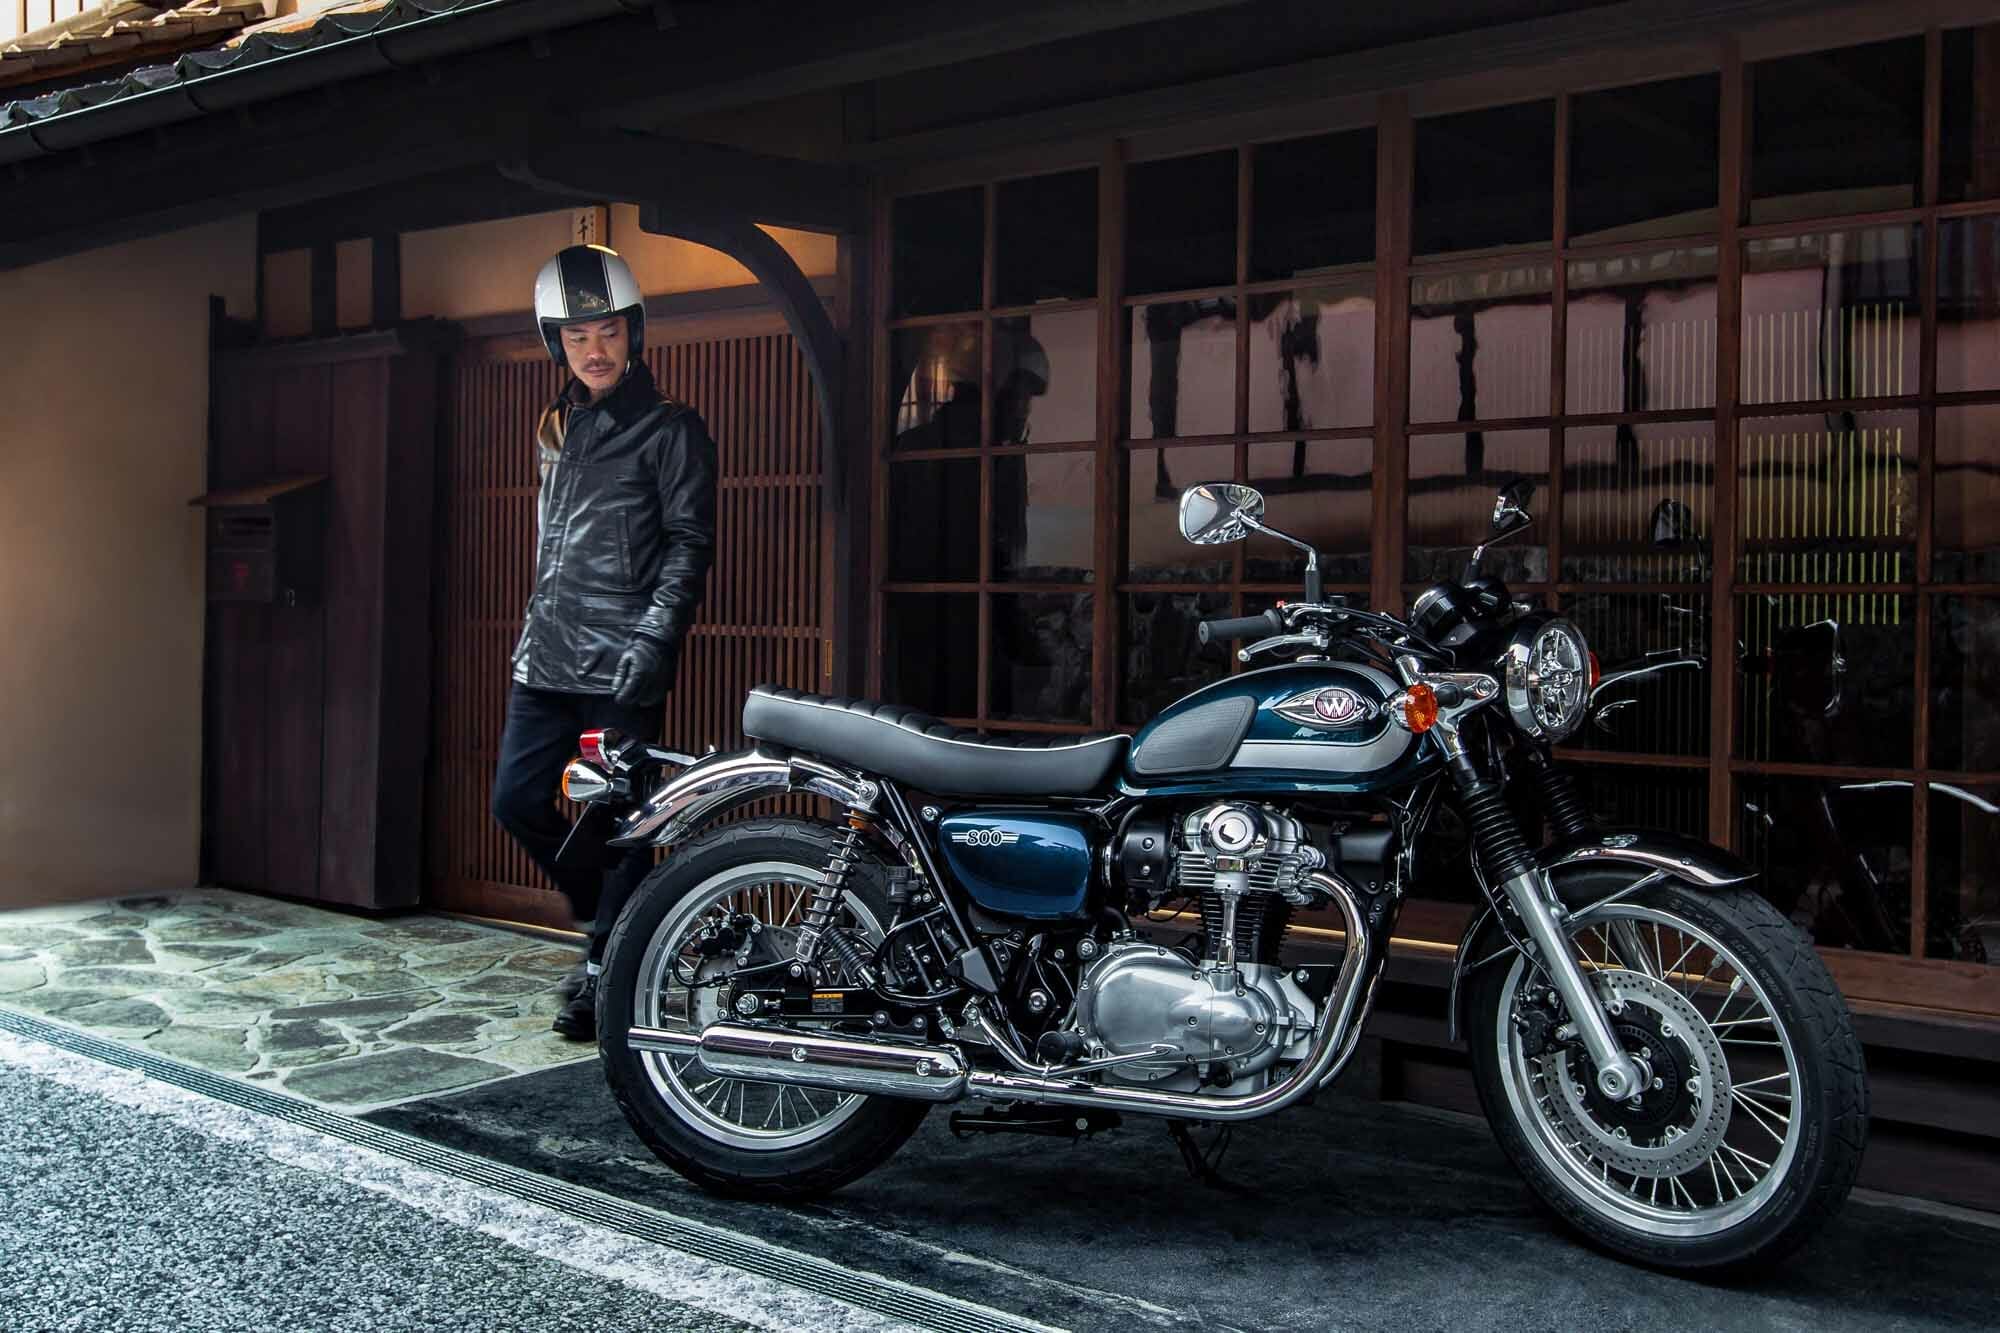 Kawasaki W800 or also Meguro?
- also in the App MOTORCYCLE NEWS